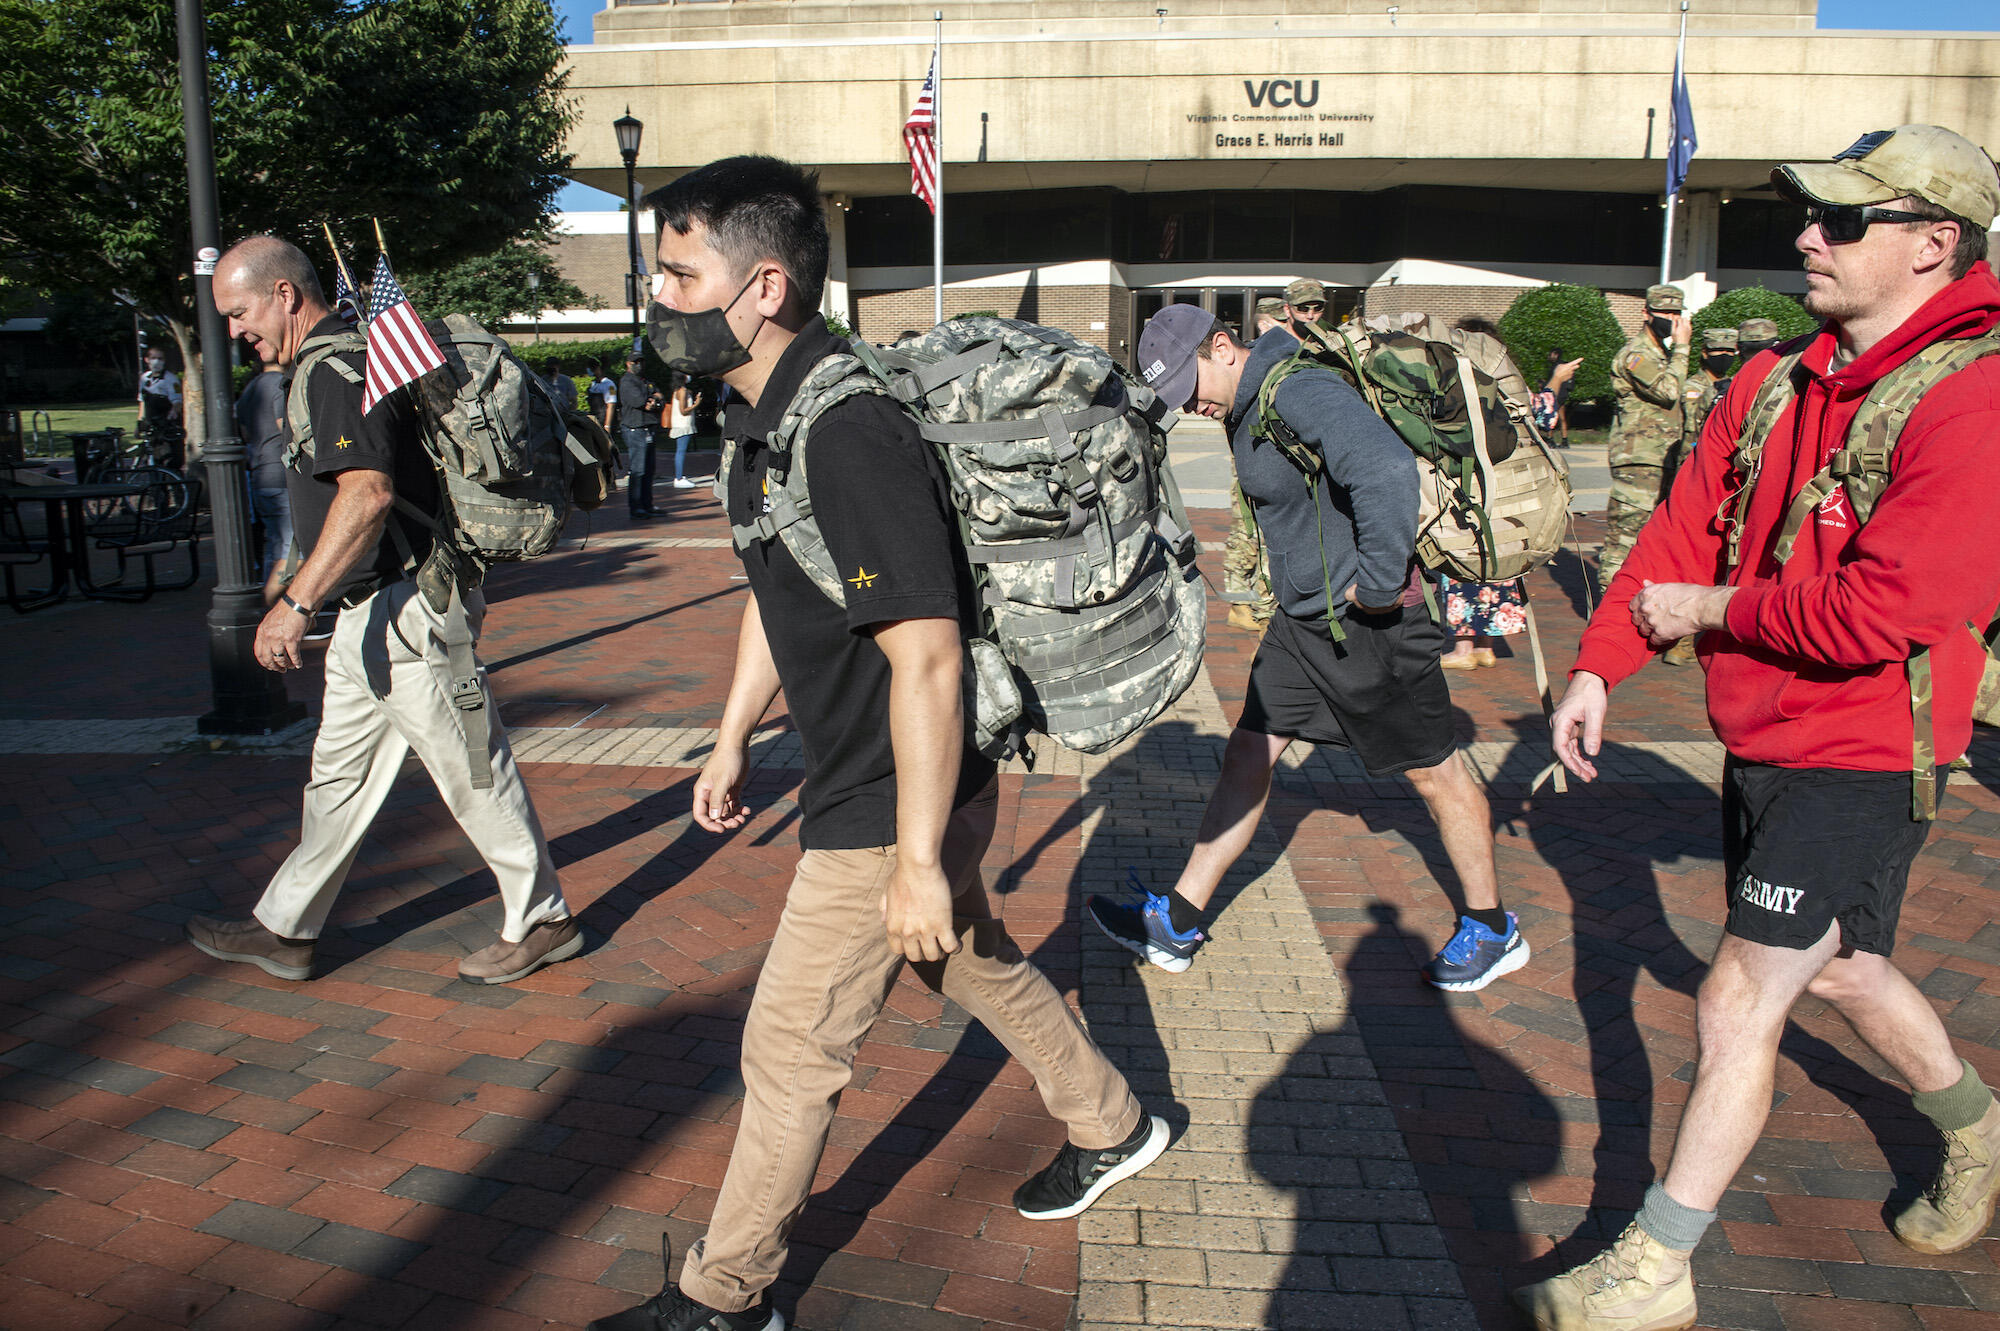 Event attendees honor those lost on 9/11/2001 and since in the War on Terror by “rucking” laps around the courtyard.